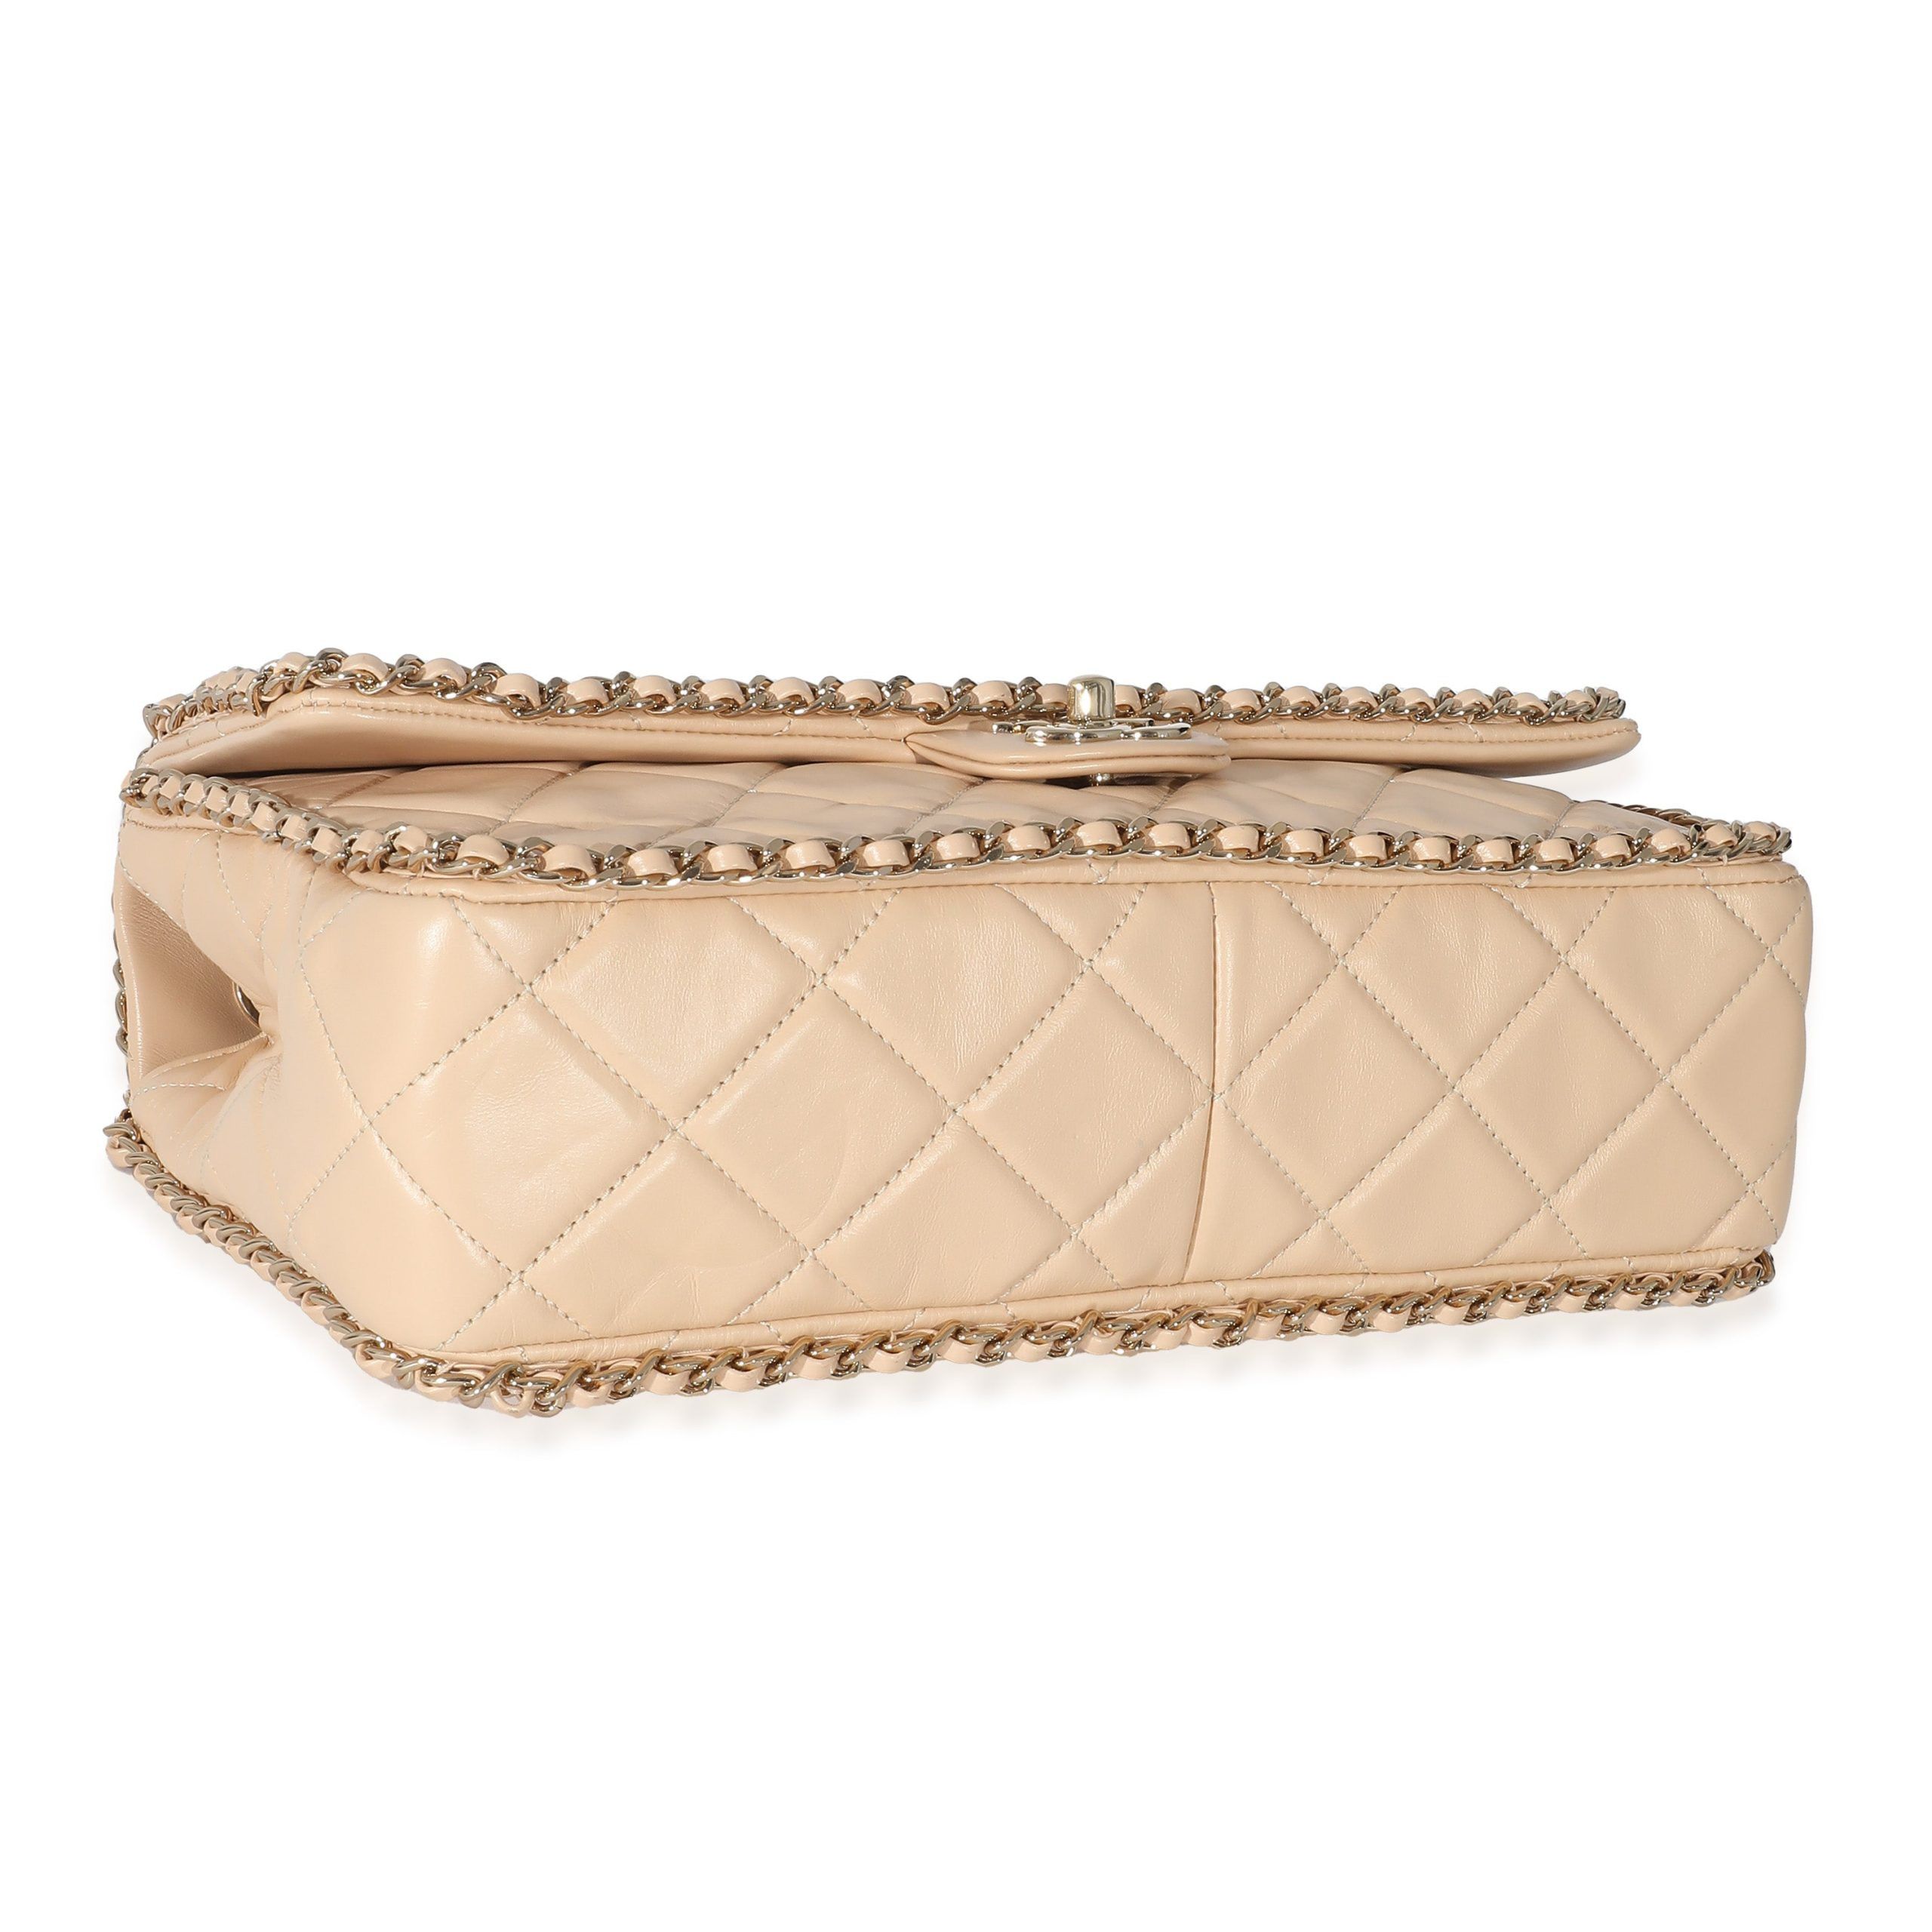 Chanel Chanel Beige Crumpled Calfskin Medium Chain All Over Flap Bag Size ONE SIZE - 7 Thumbnail